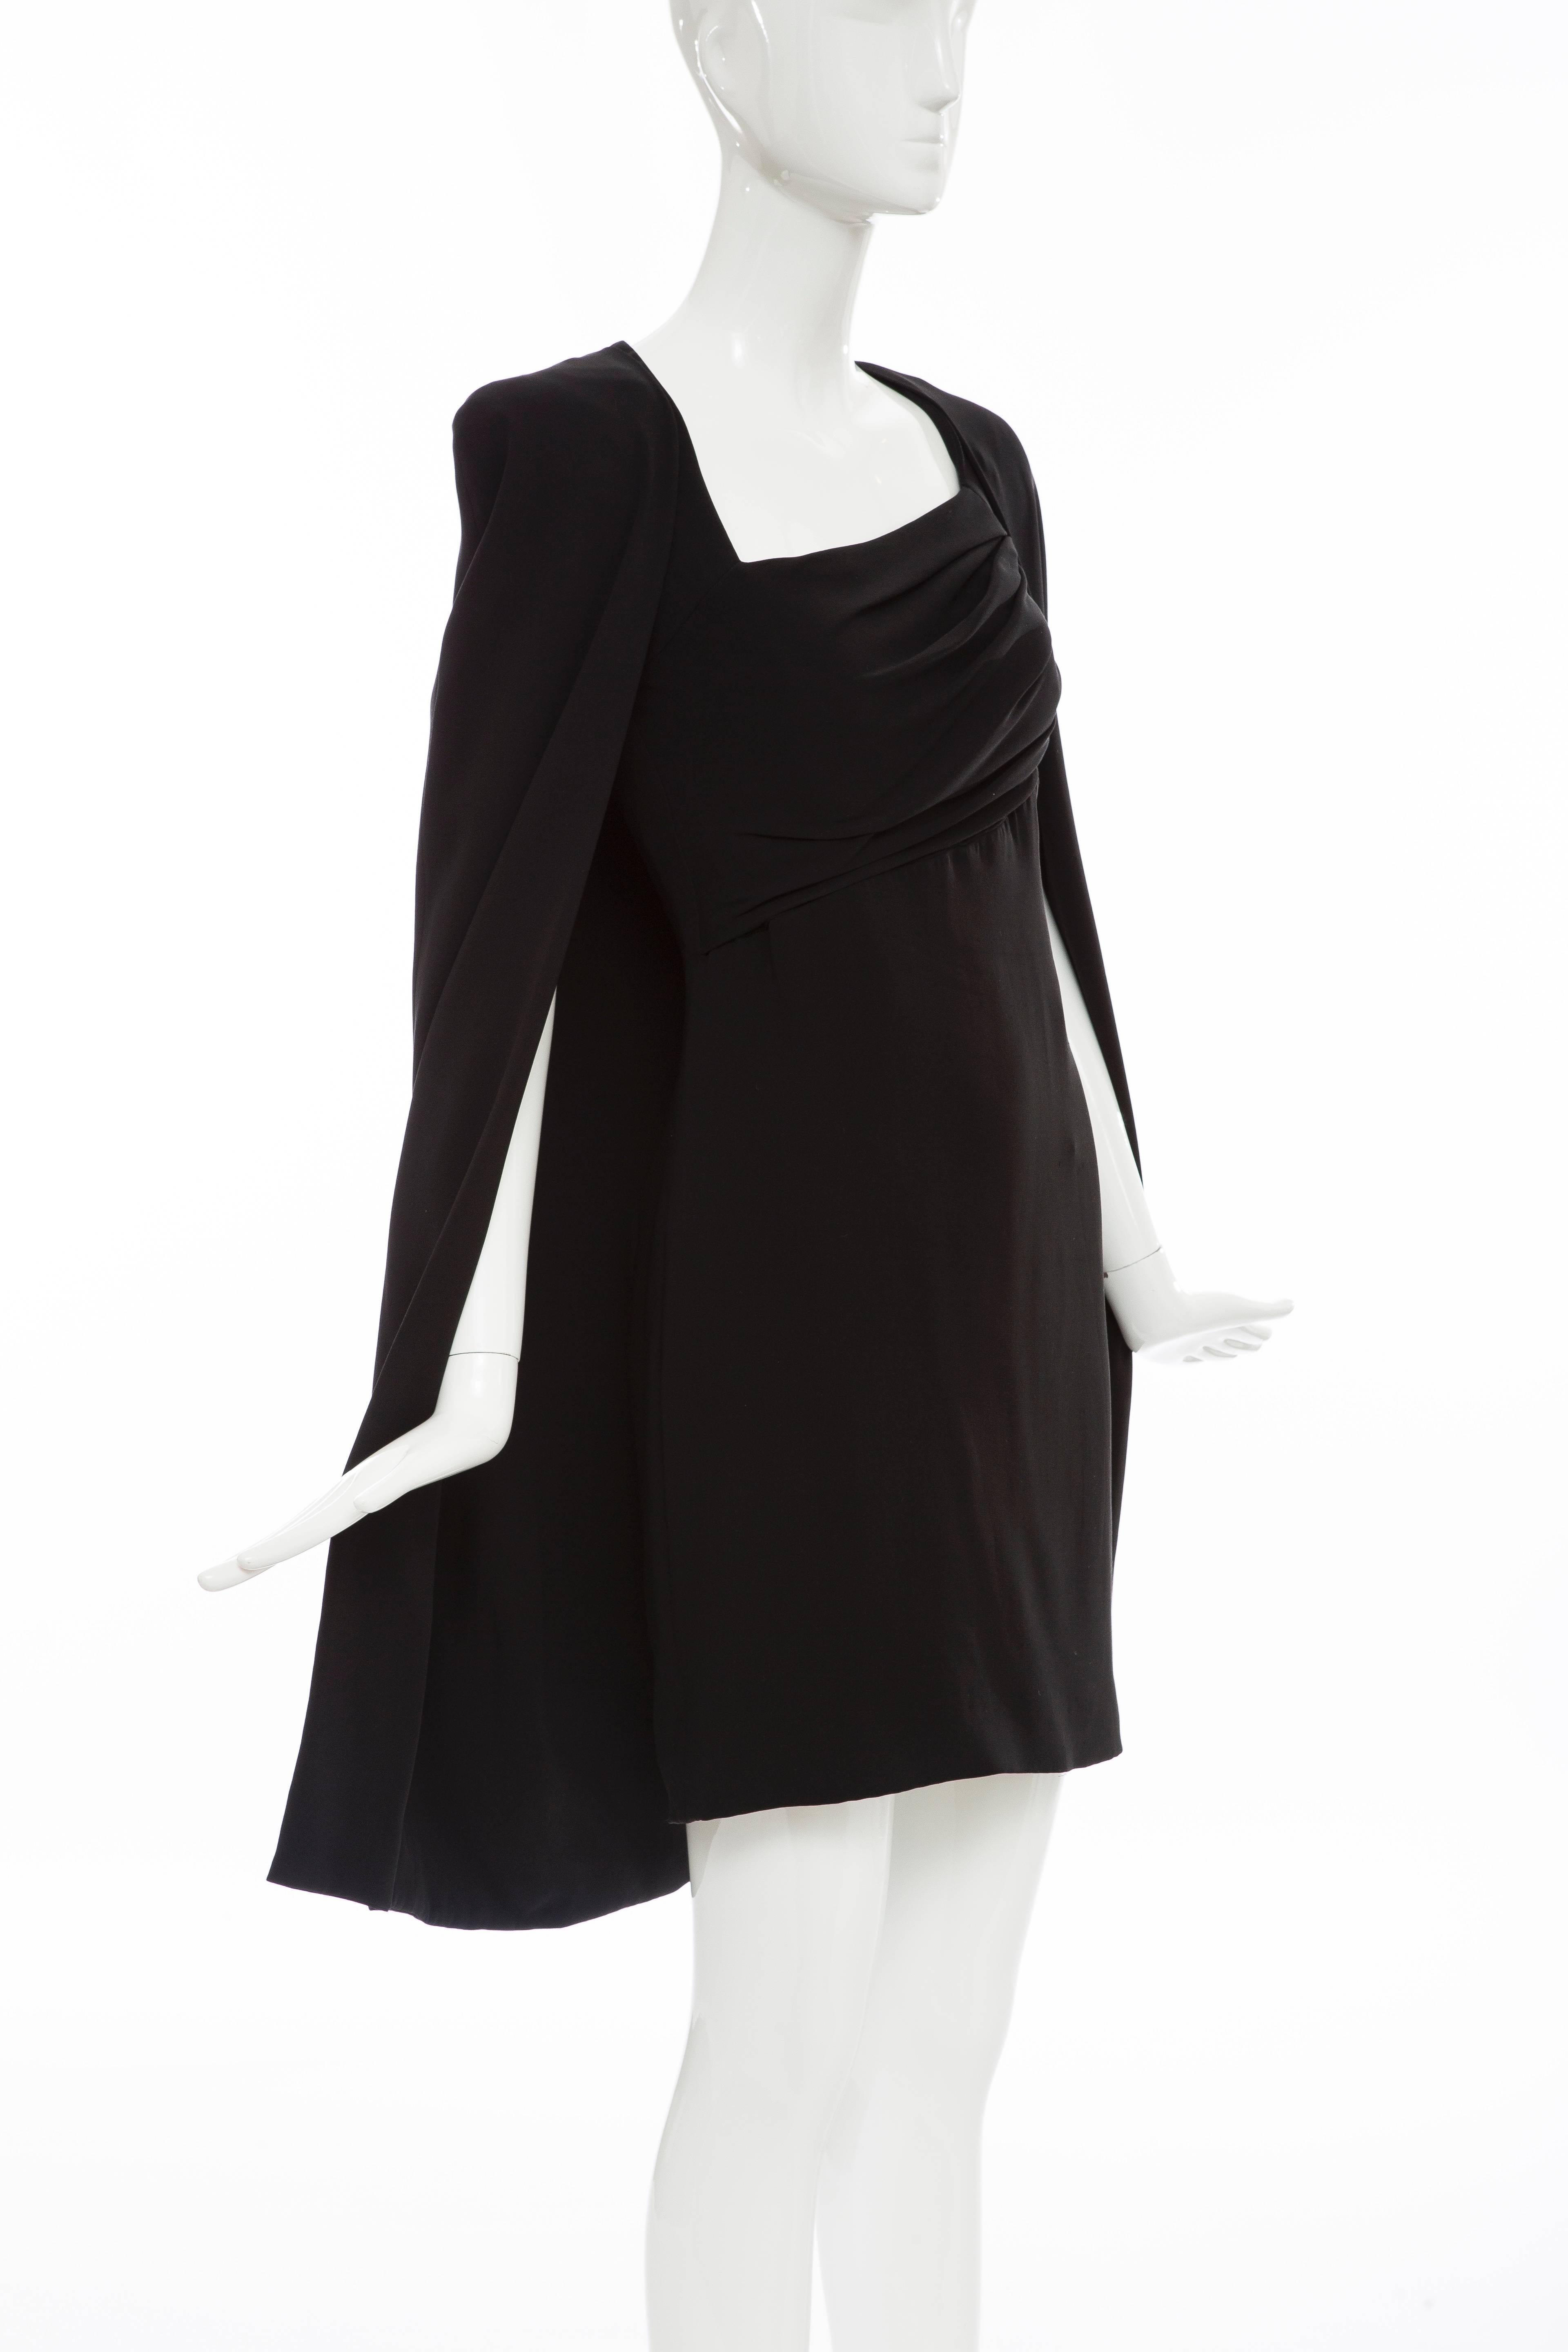 Women's Tom Ford Black Silk Evening Dress With Matching Cape, Fall 2012